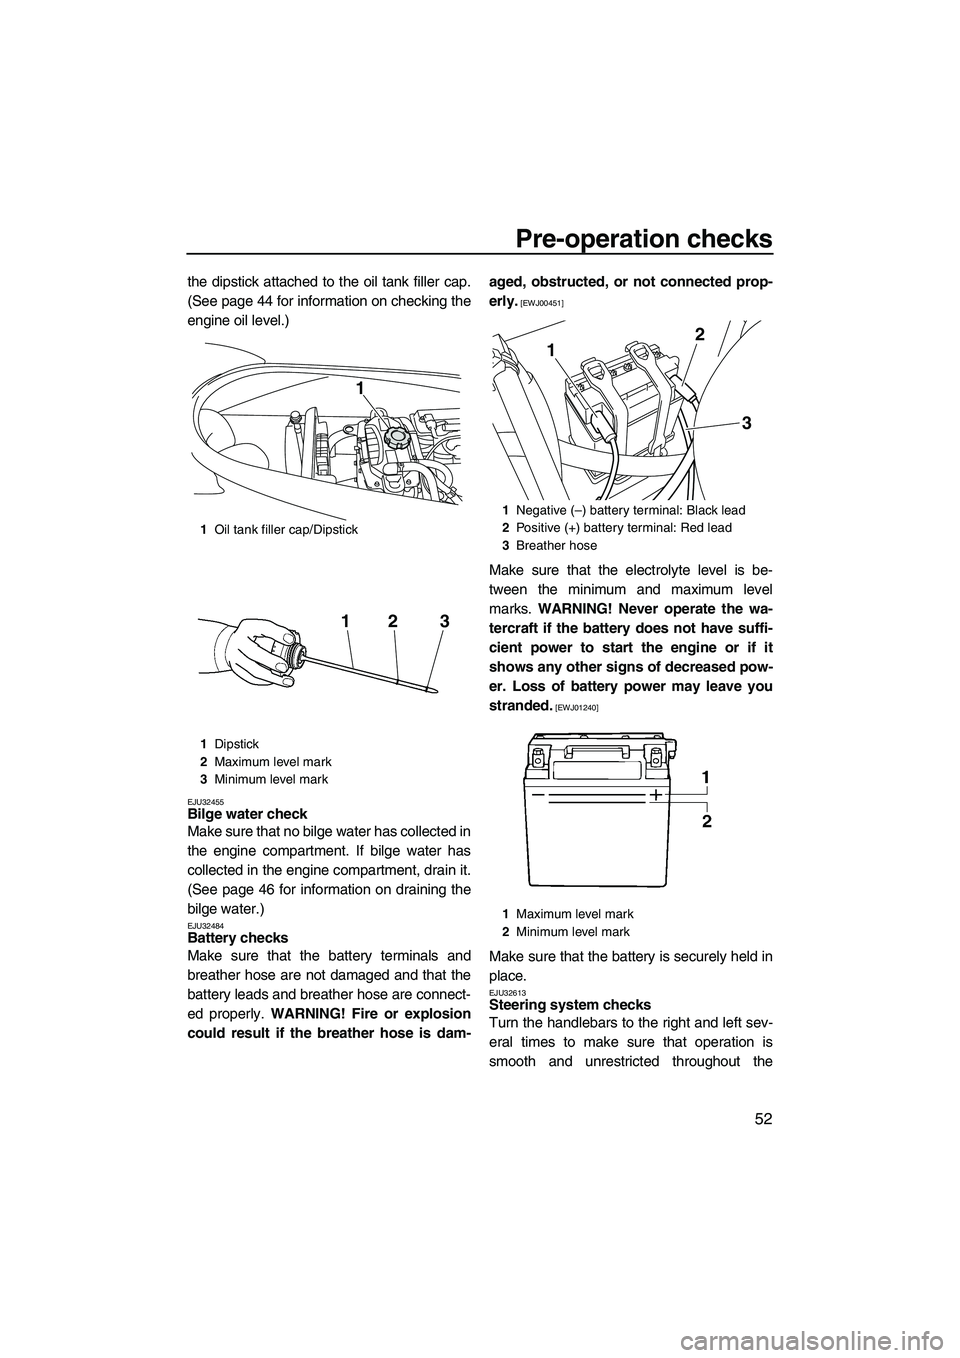 YAMAHA VX SPORT 2010  Owners Manual Pre-operation checks
52
the dipstick attached to the oil tank filler cap.
(See page 44 for information on checking the
engine oil level.)
EJU32455Bilge water check 
Make sure that no bilge water has c